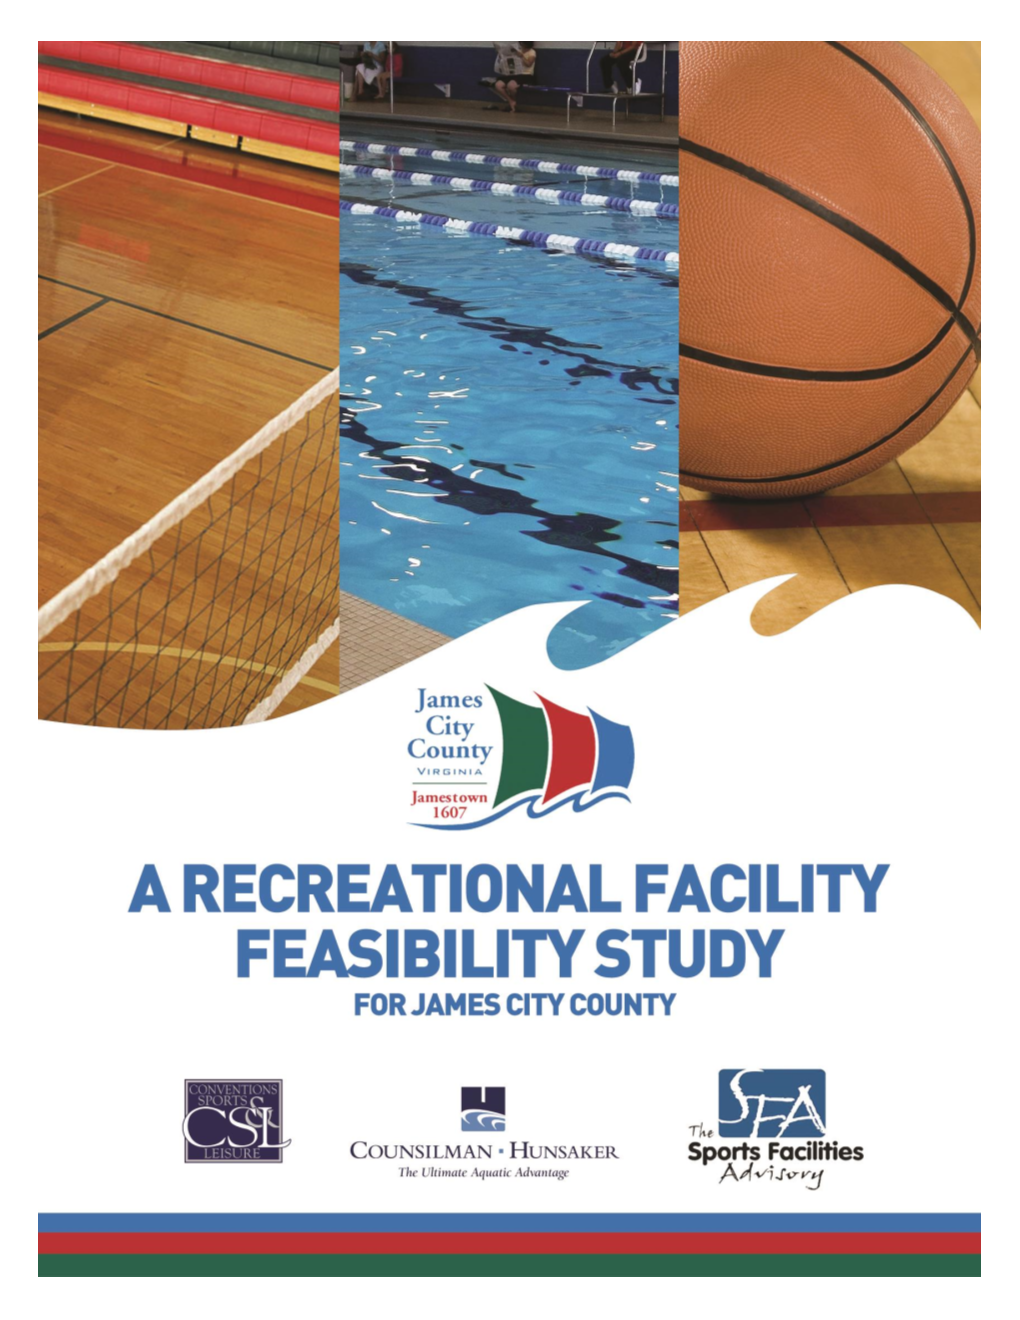 Recreational Facility Feasibility Study for James City County